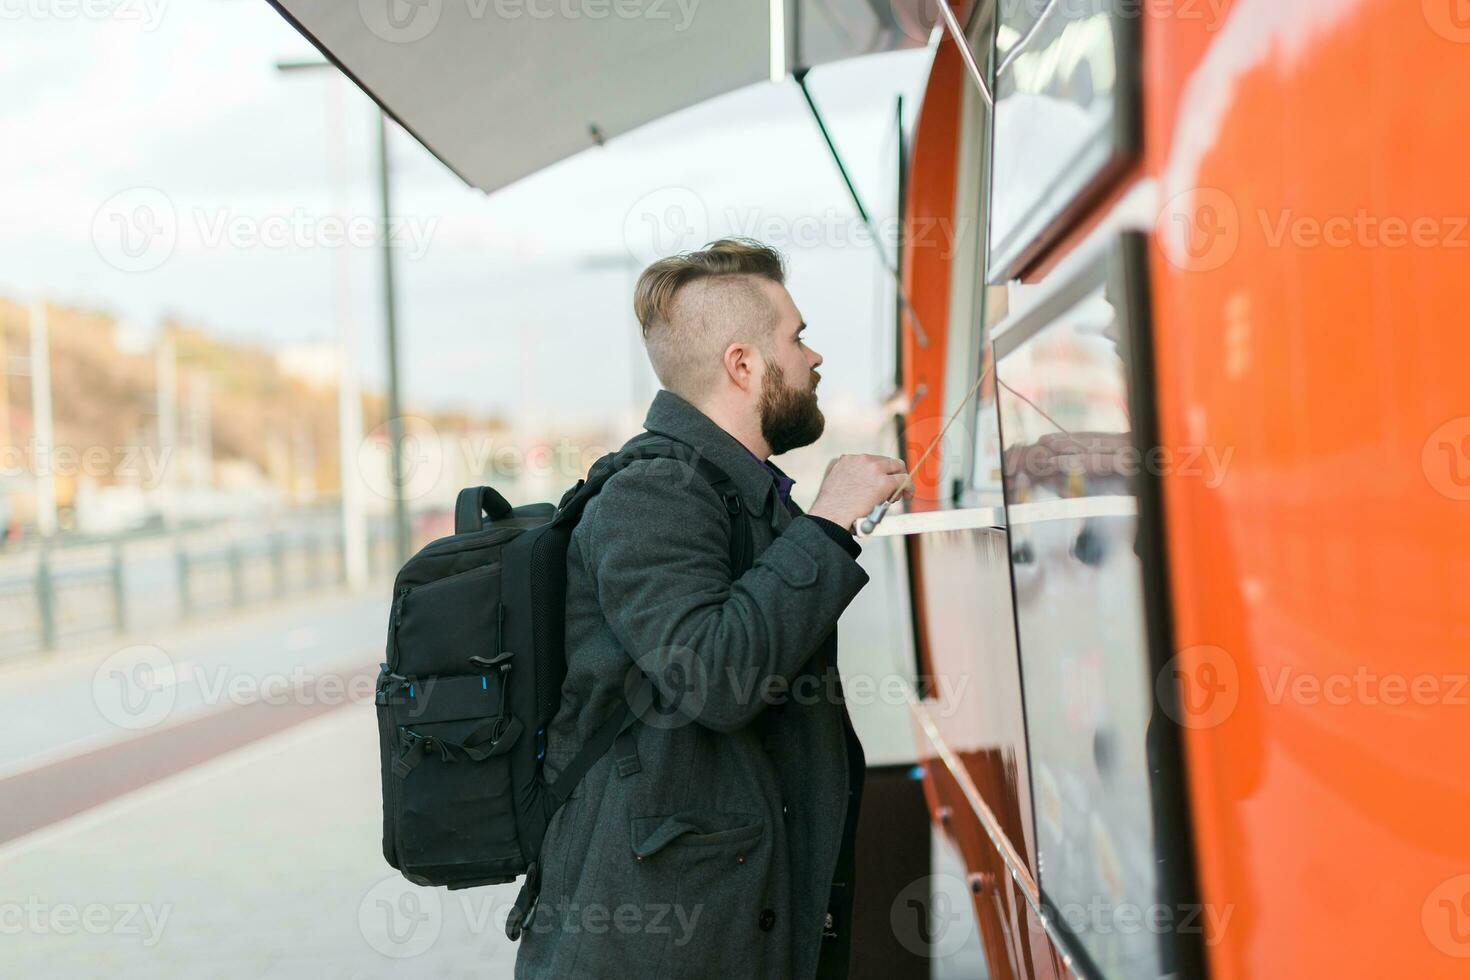 Portrait of man choosing fast food in food truck in the street. Meal, food industry and streetfood concept. photo